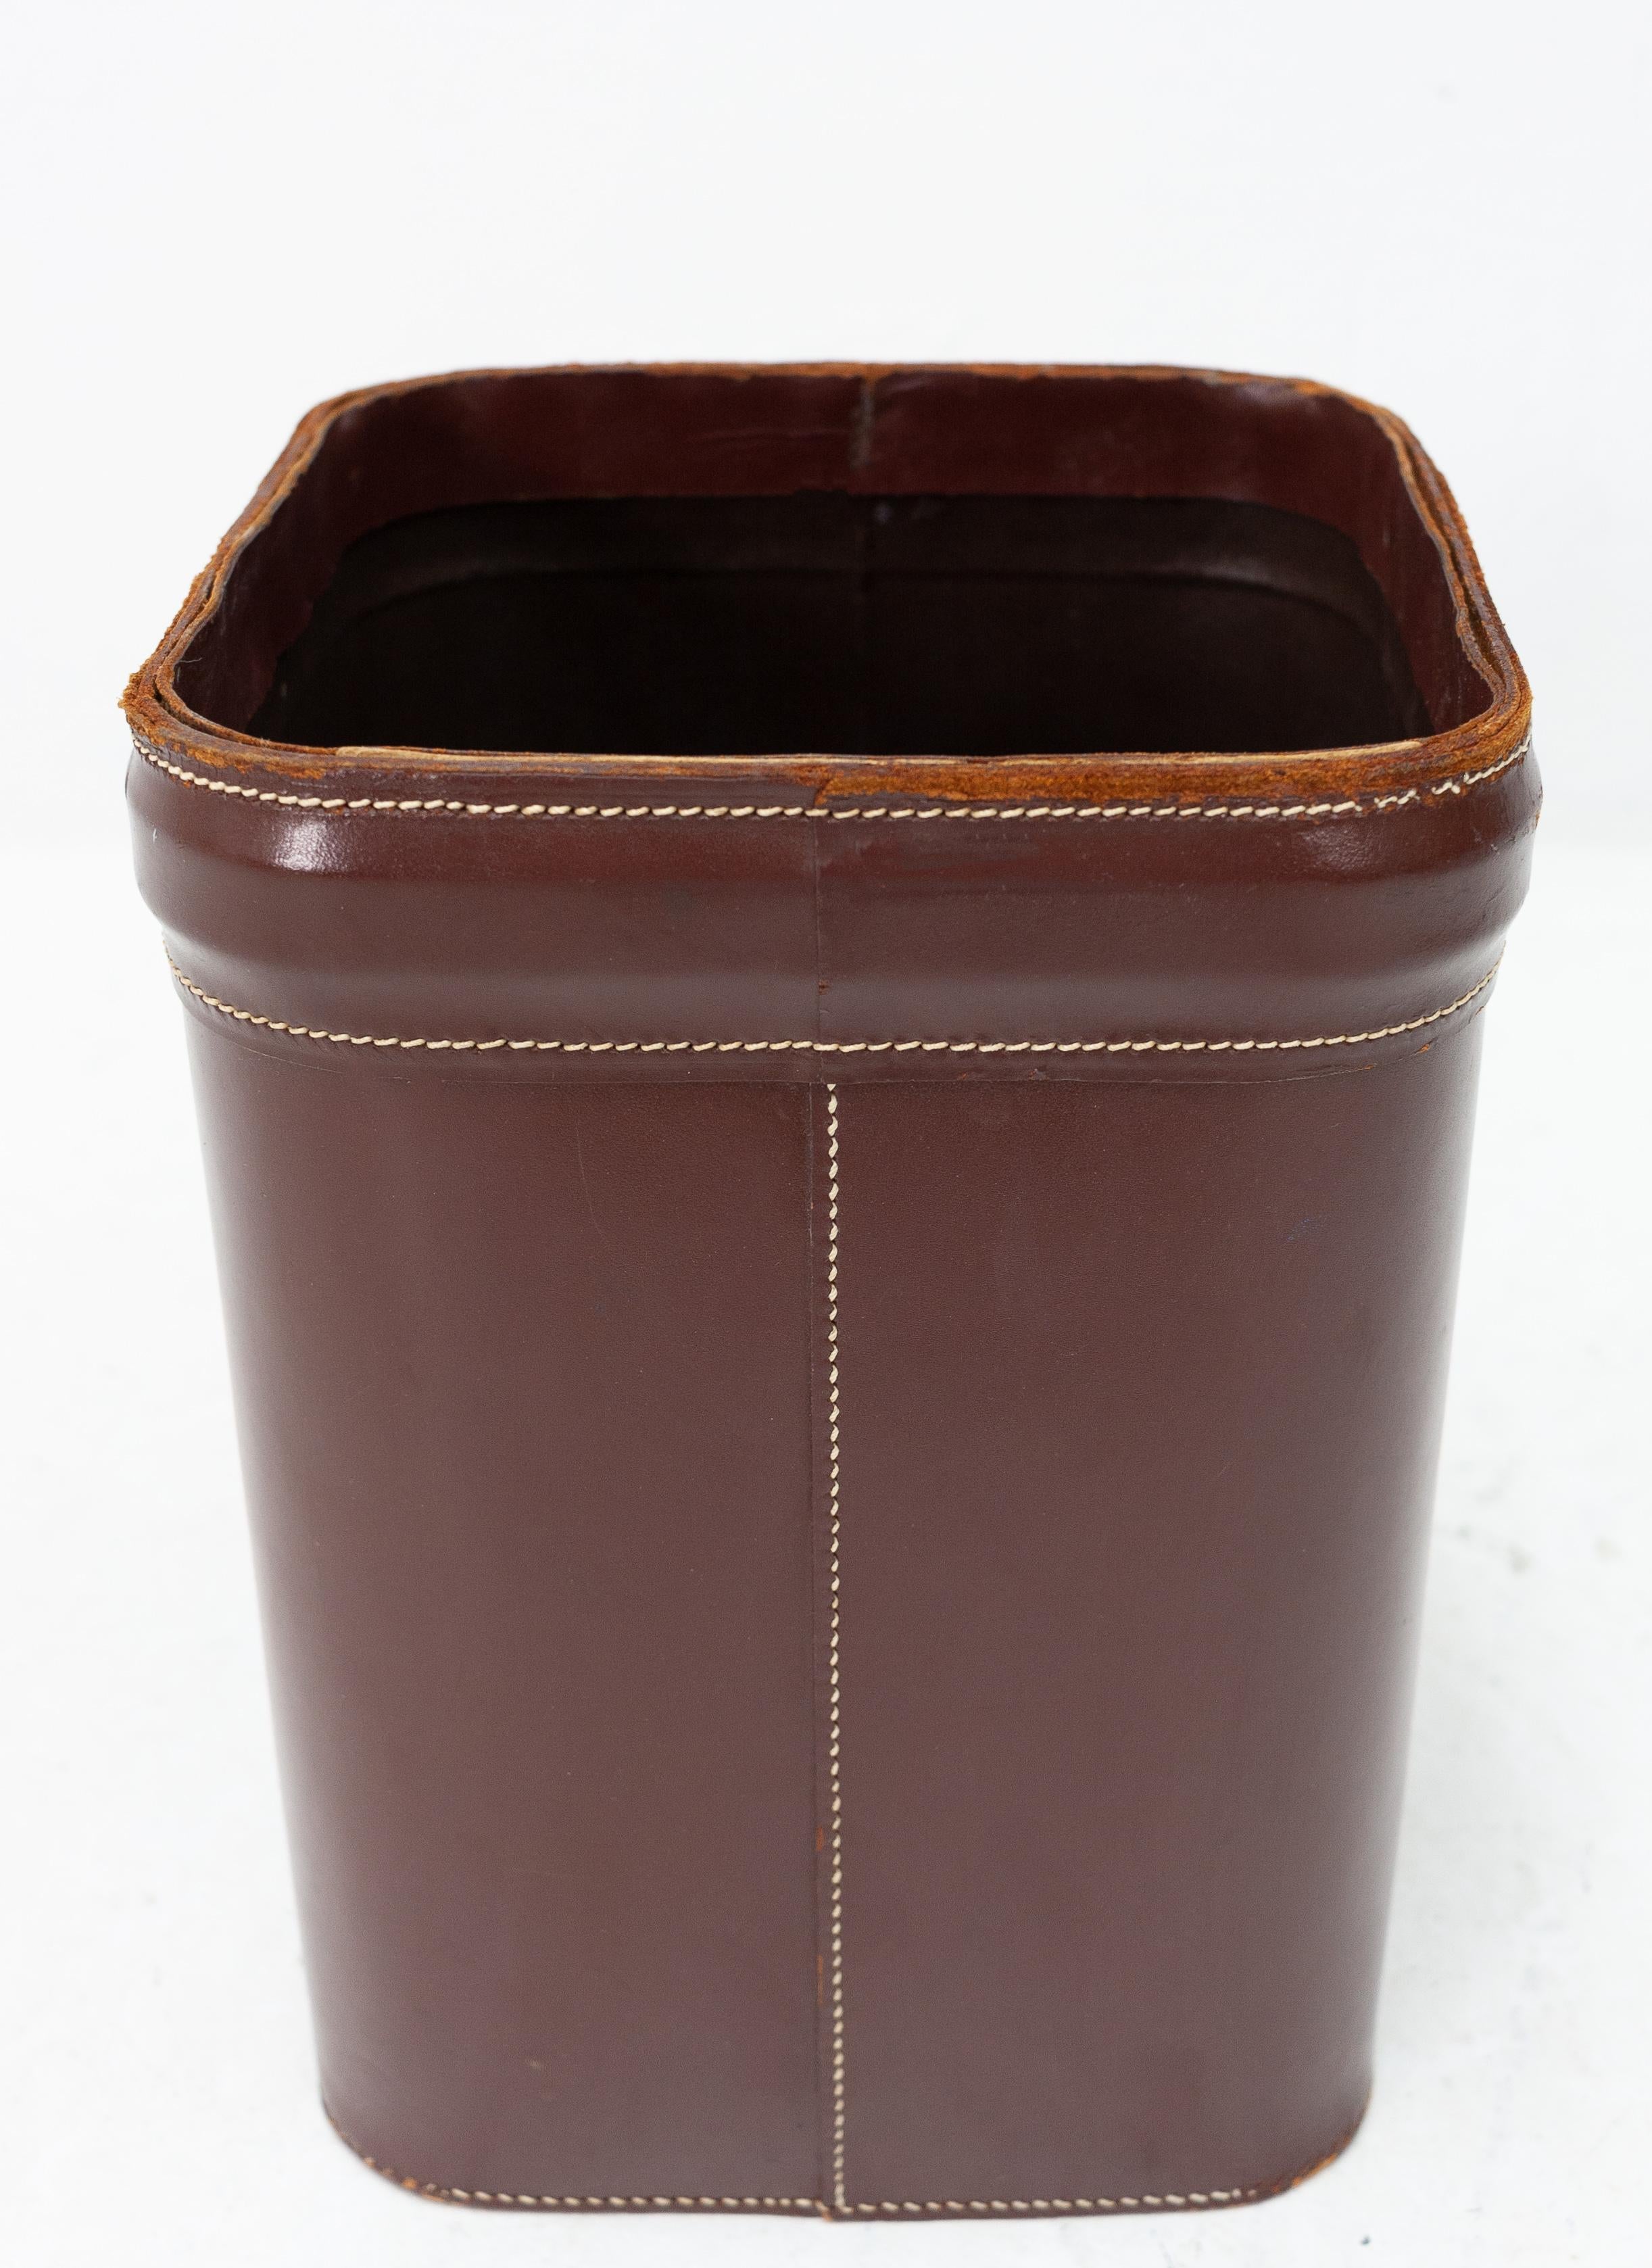 Very nice waste(paper) basket in light brown leather with cream stitching, 1960s, France.